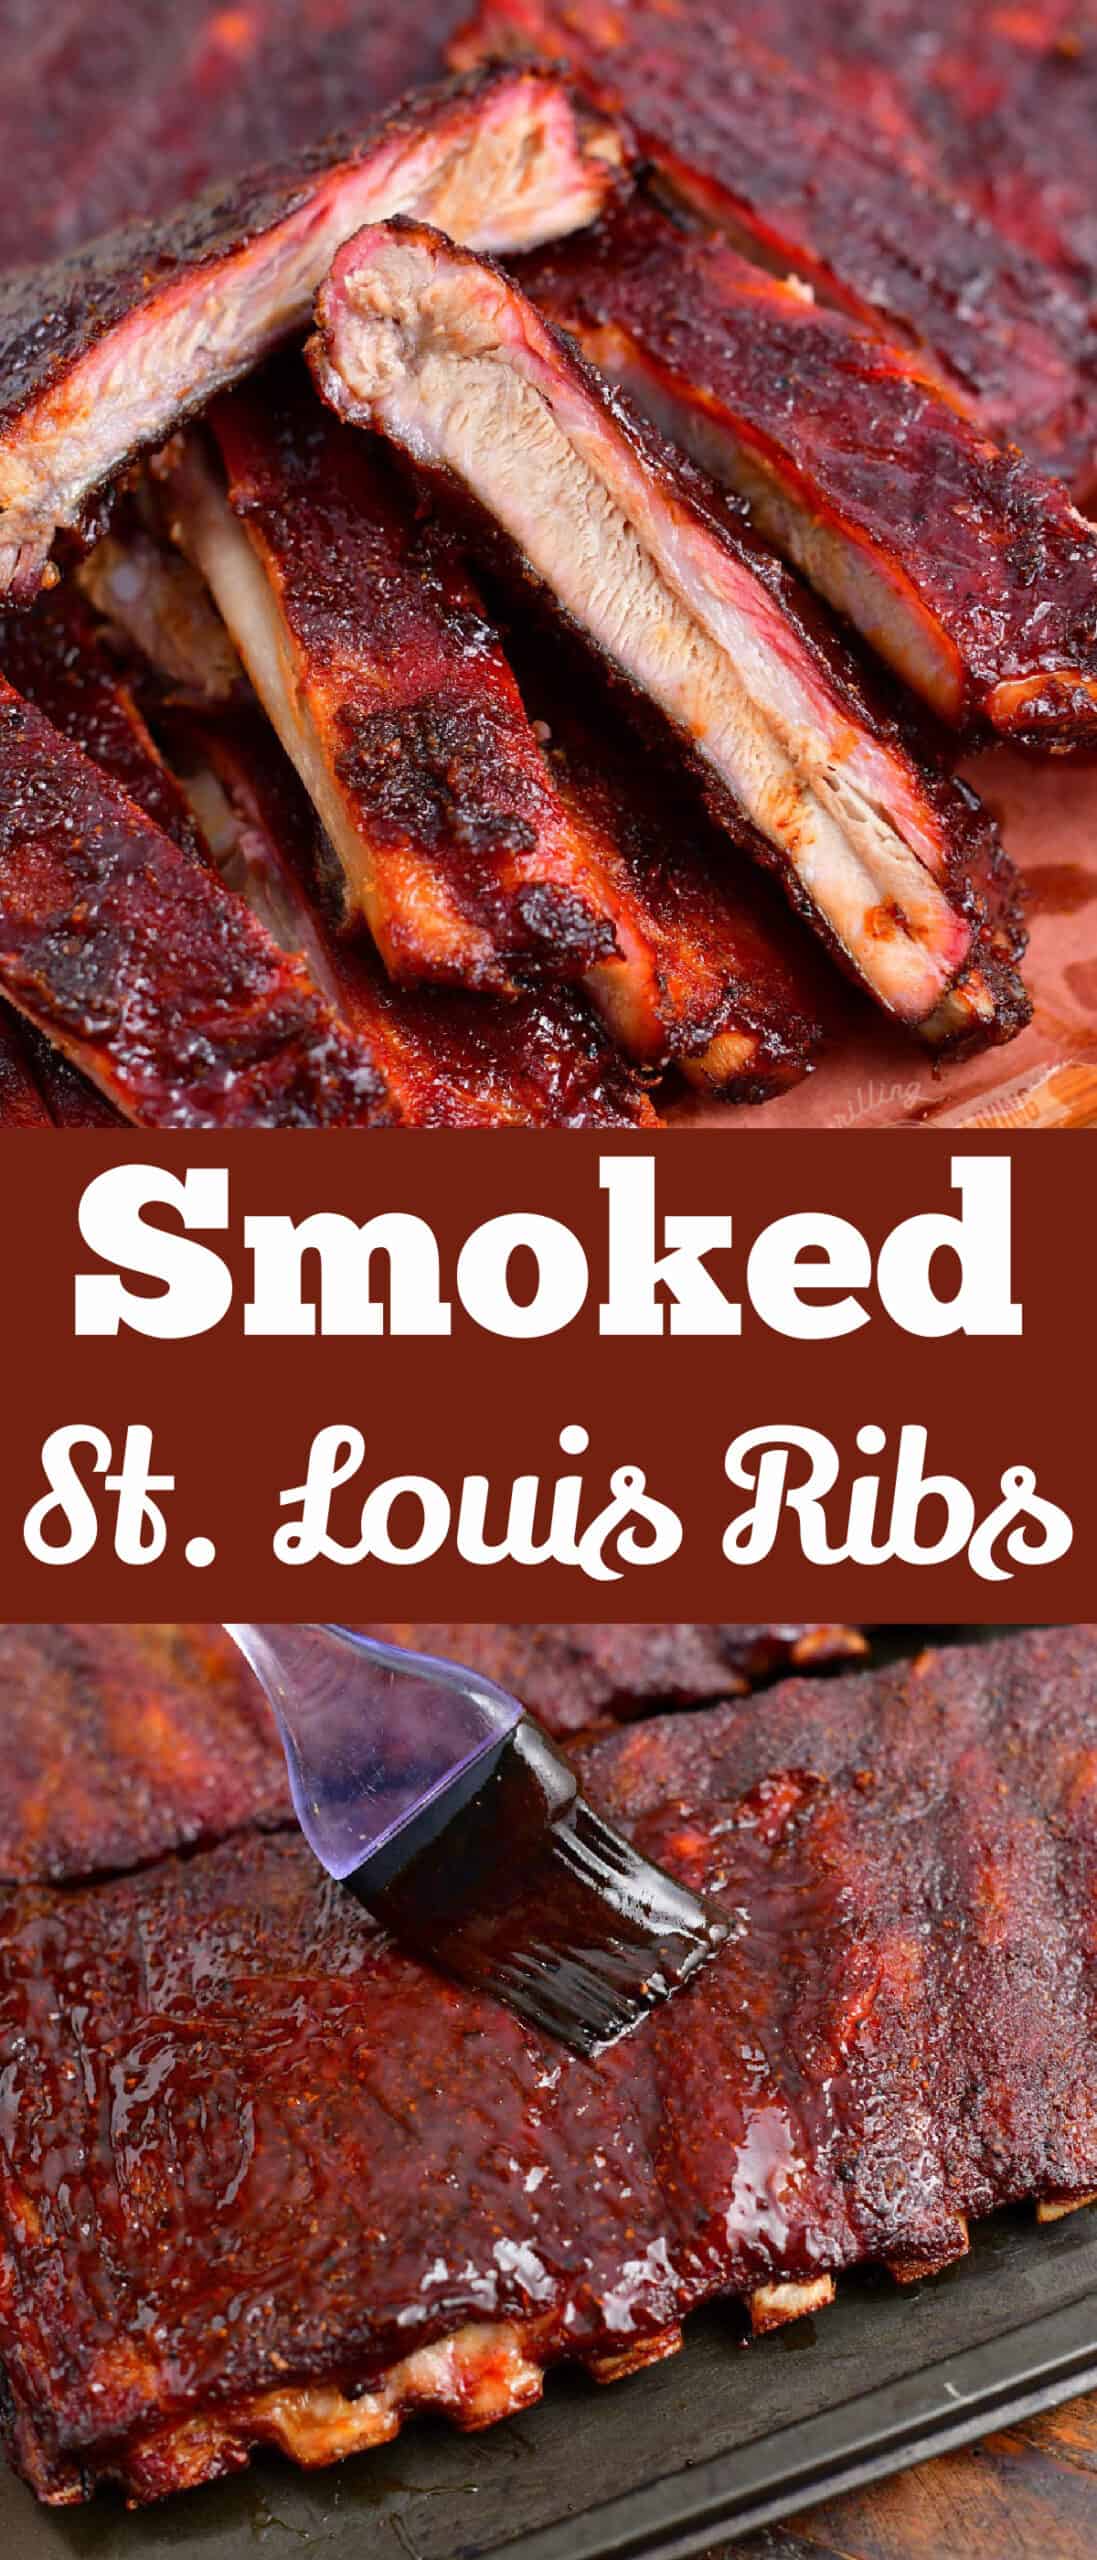 title collage of smoked ribs pictured individual ribs and whole rack